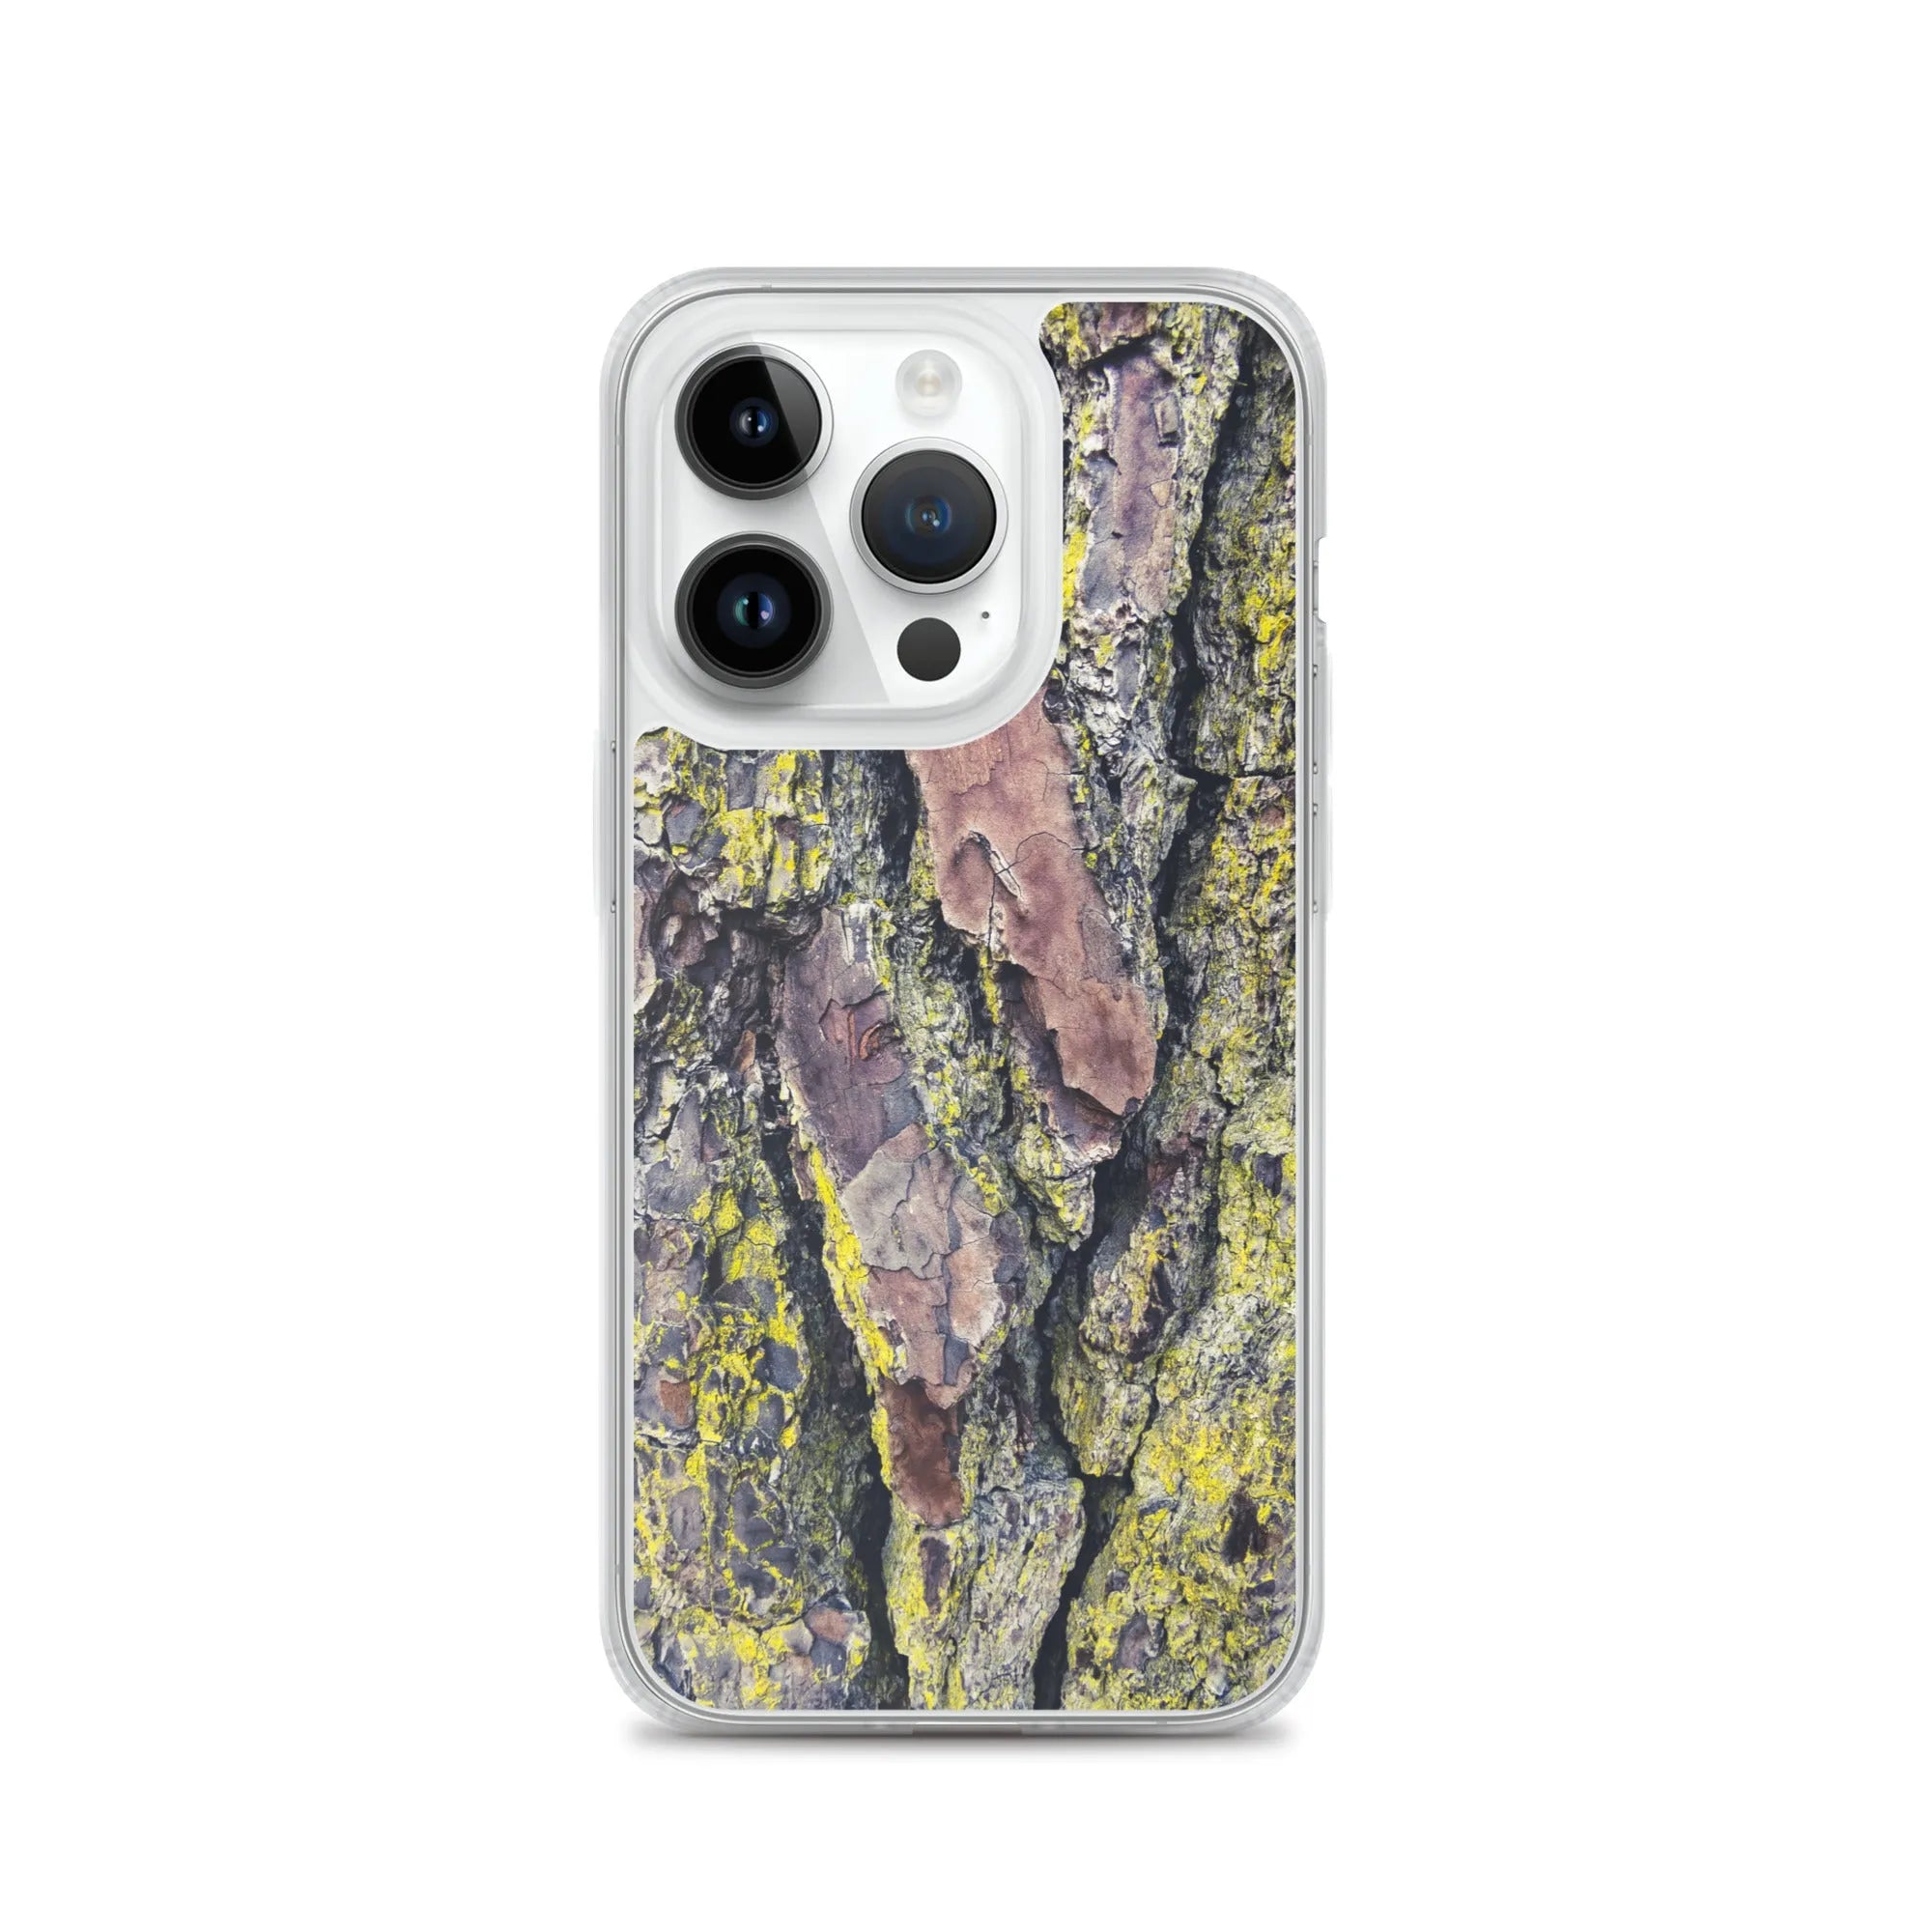 Barking Mad 2 + Too - Botanical Art Pattern Iphone Case - Iphone 14 Pro - Mobile Phone Cases - Aesthetic Art